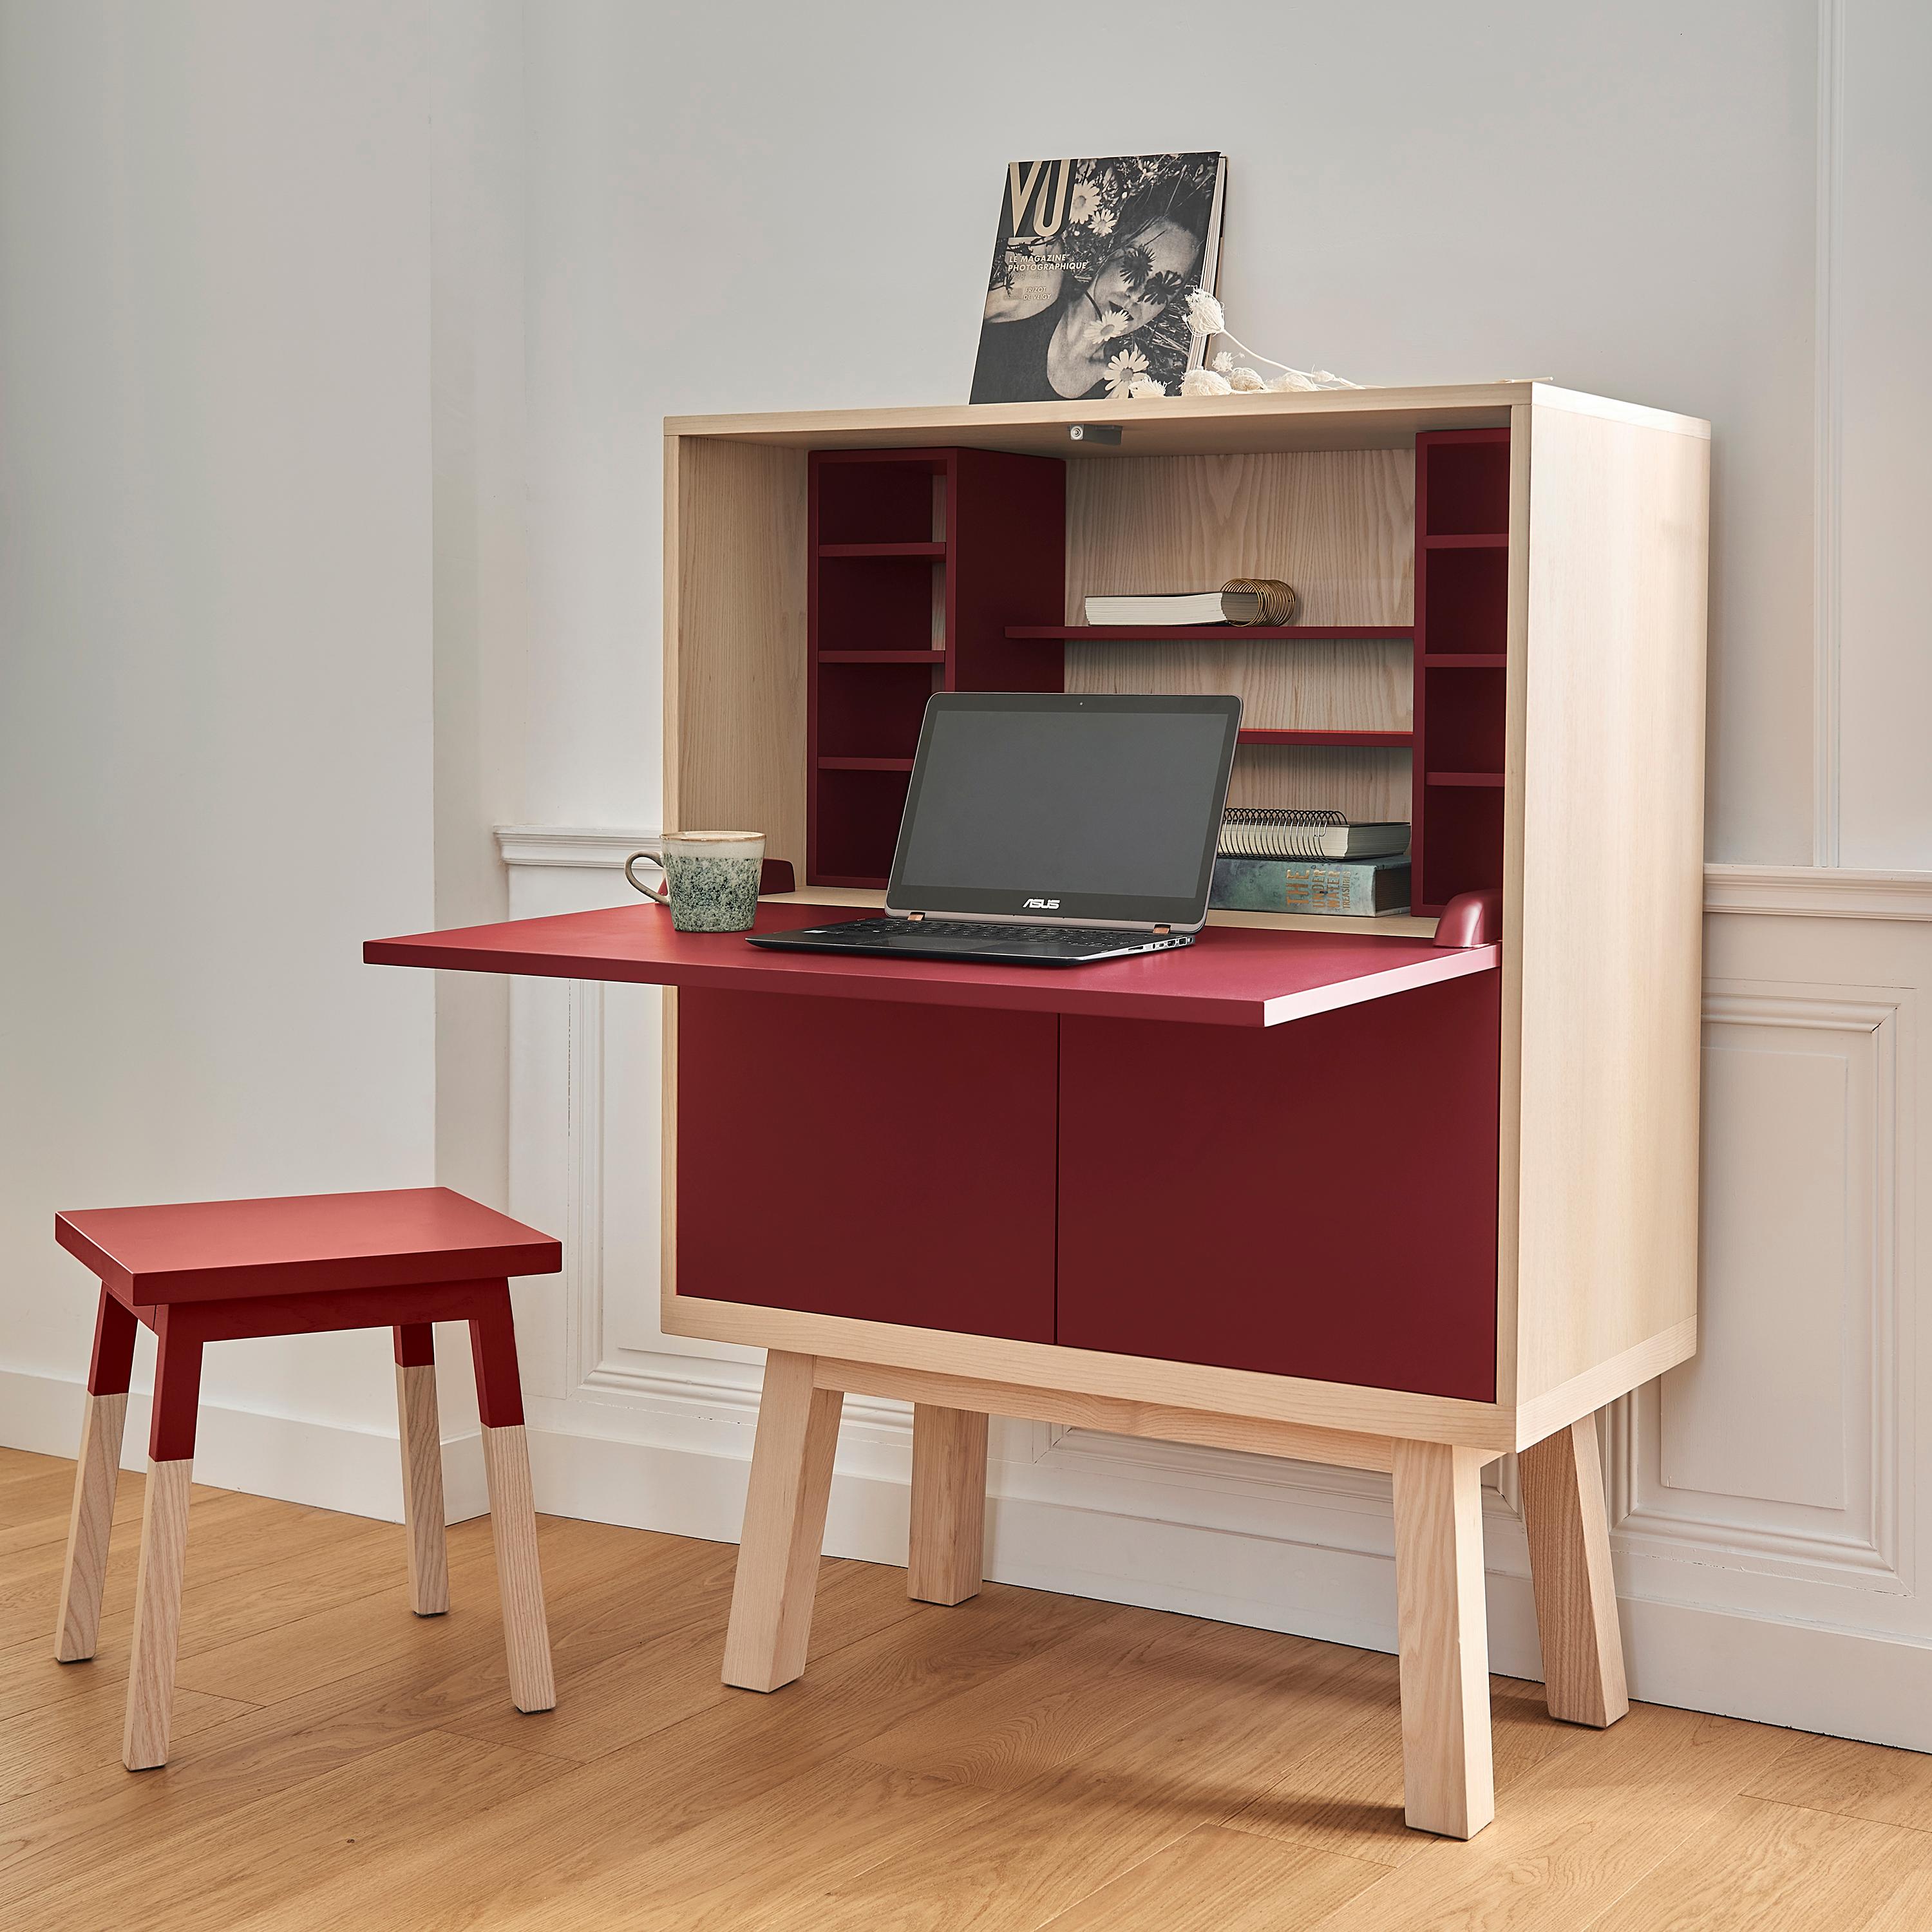 This secretary Desk belongs to our ÉGÉE COLLECTION designed by the Parisian designer Eric Gizard. 

Eric adopts for this collection the refined codes of Scandinavian design, combining natural materials and sobriety of lines and adds very beautiful